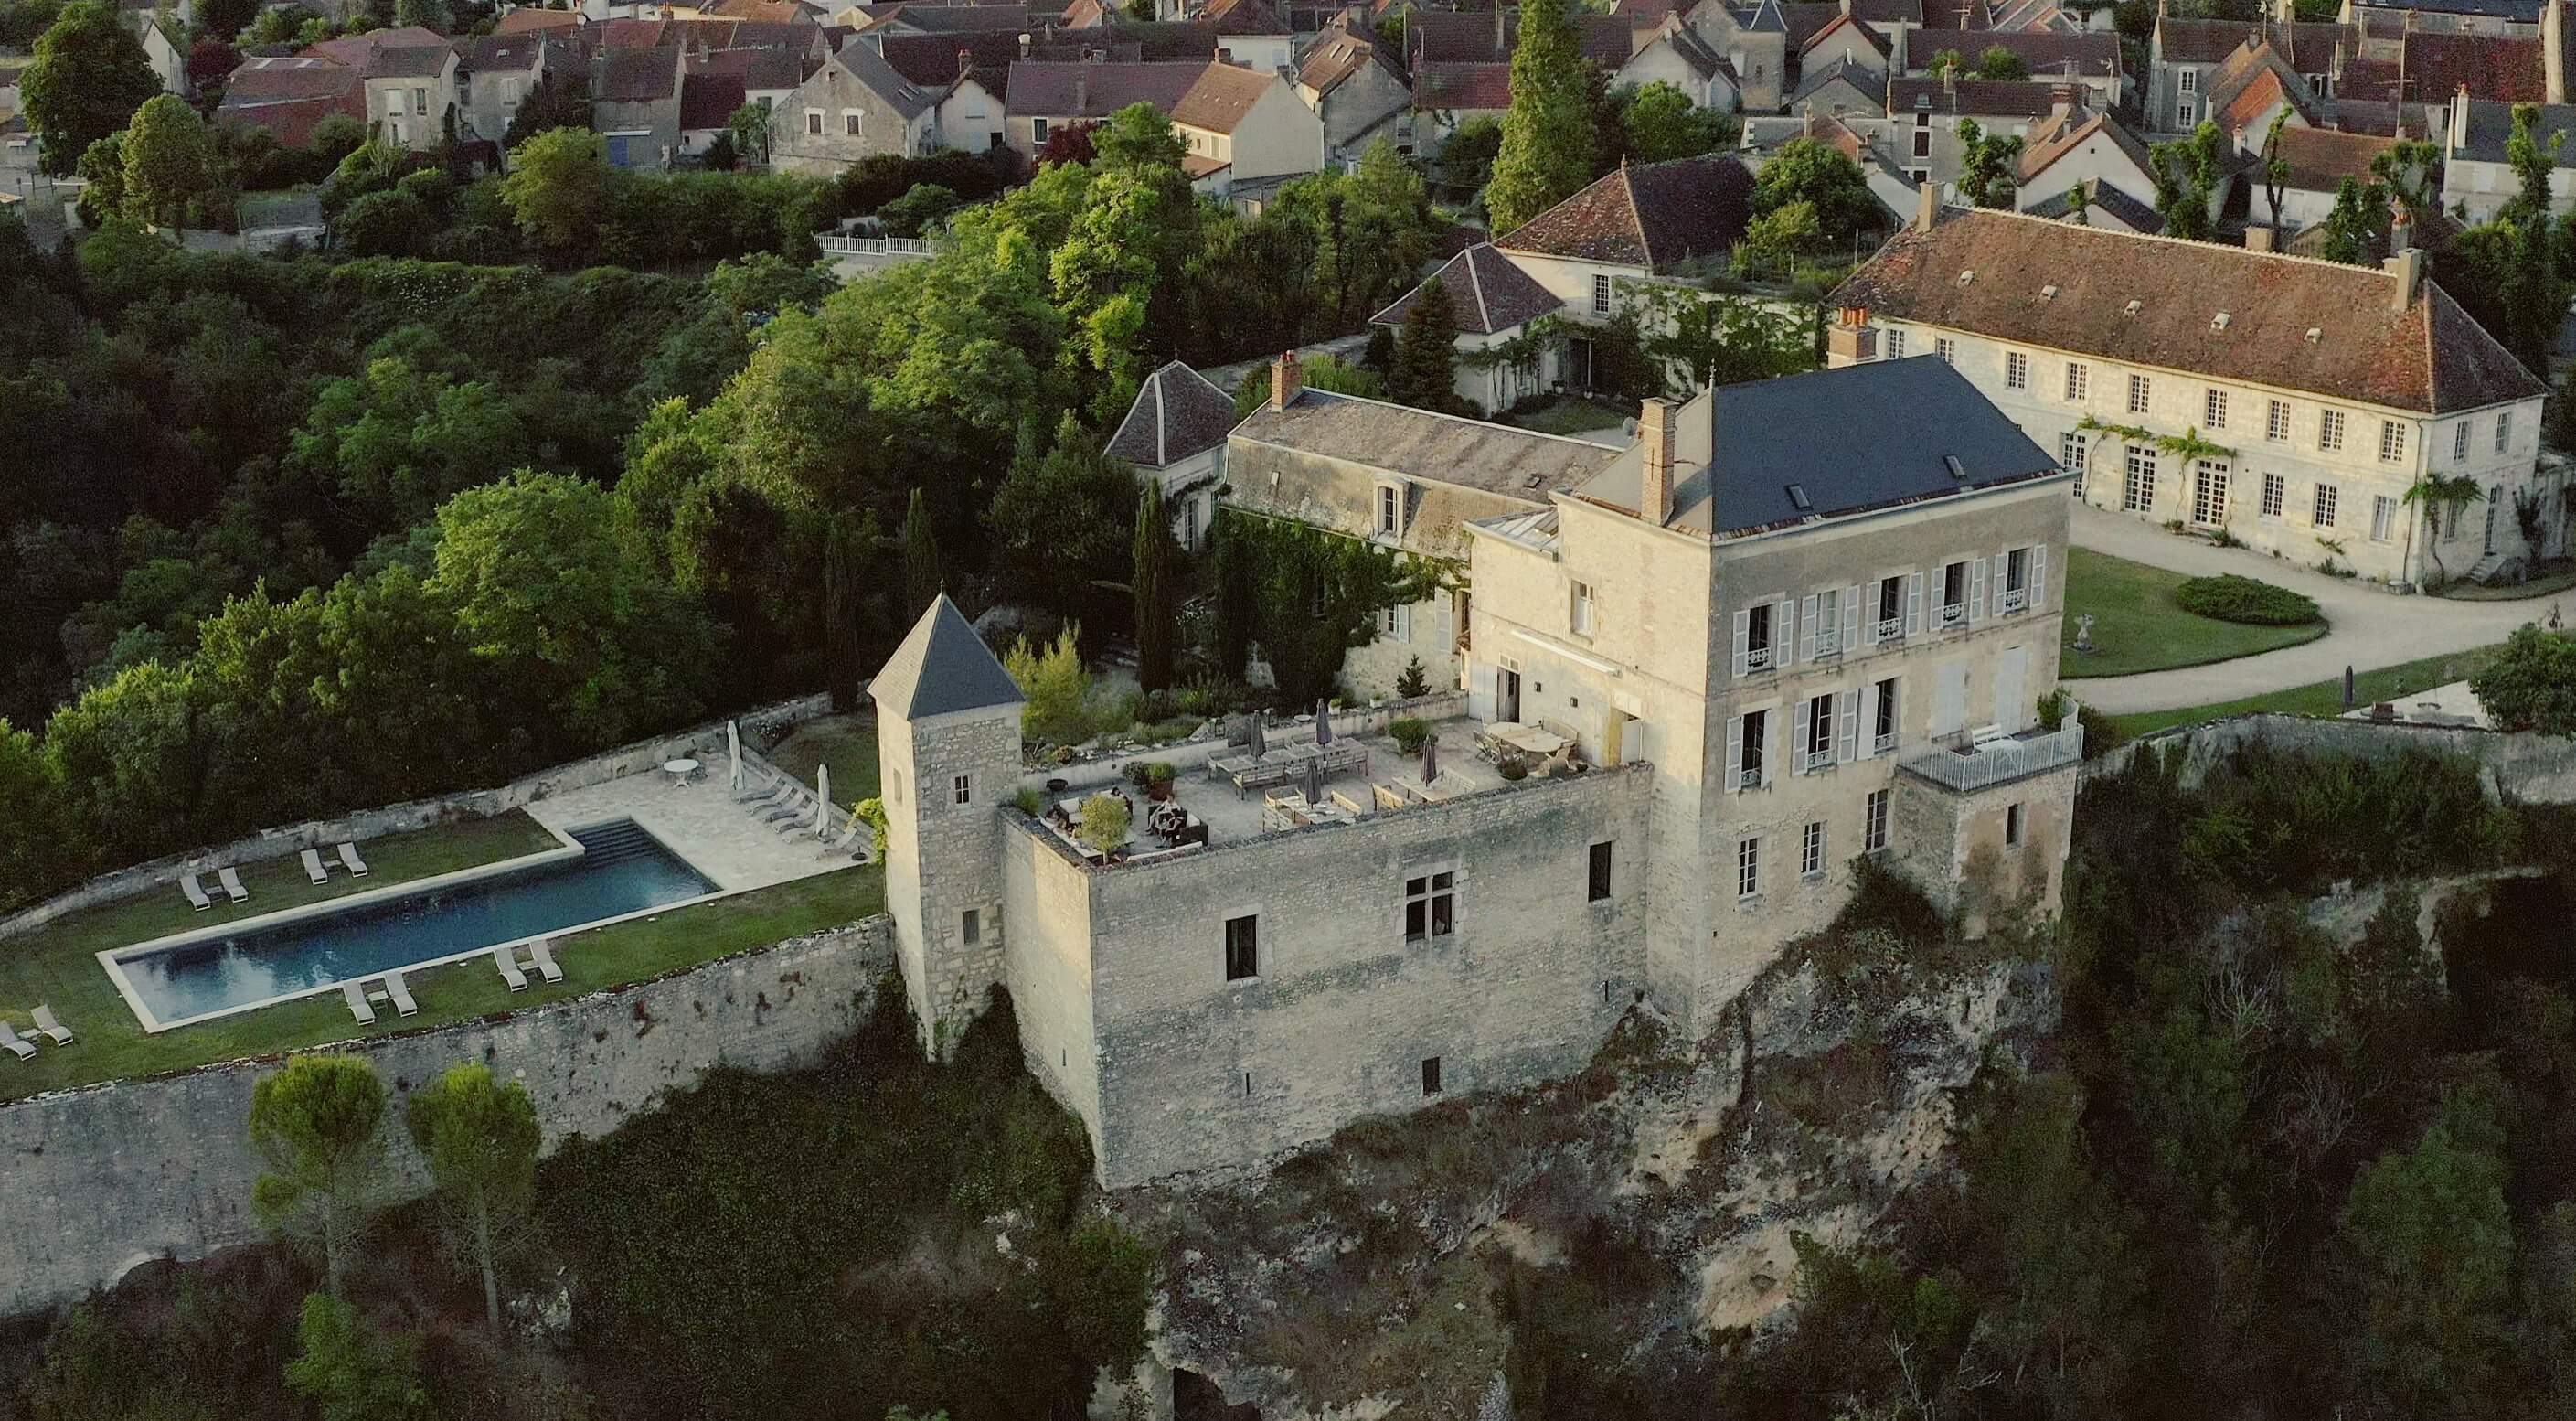 Chateau de Mailly entire site arial view